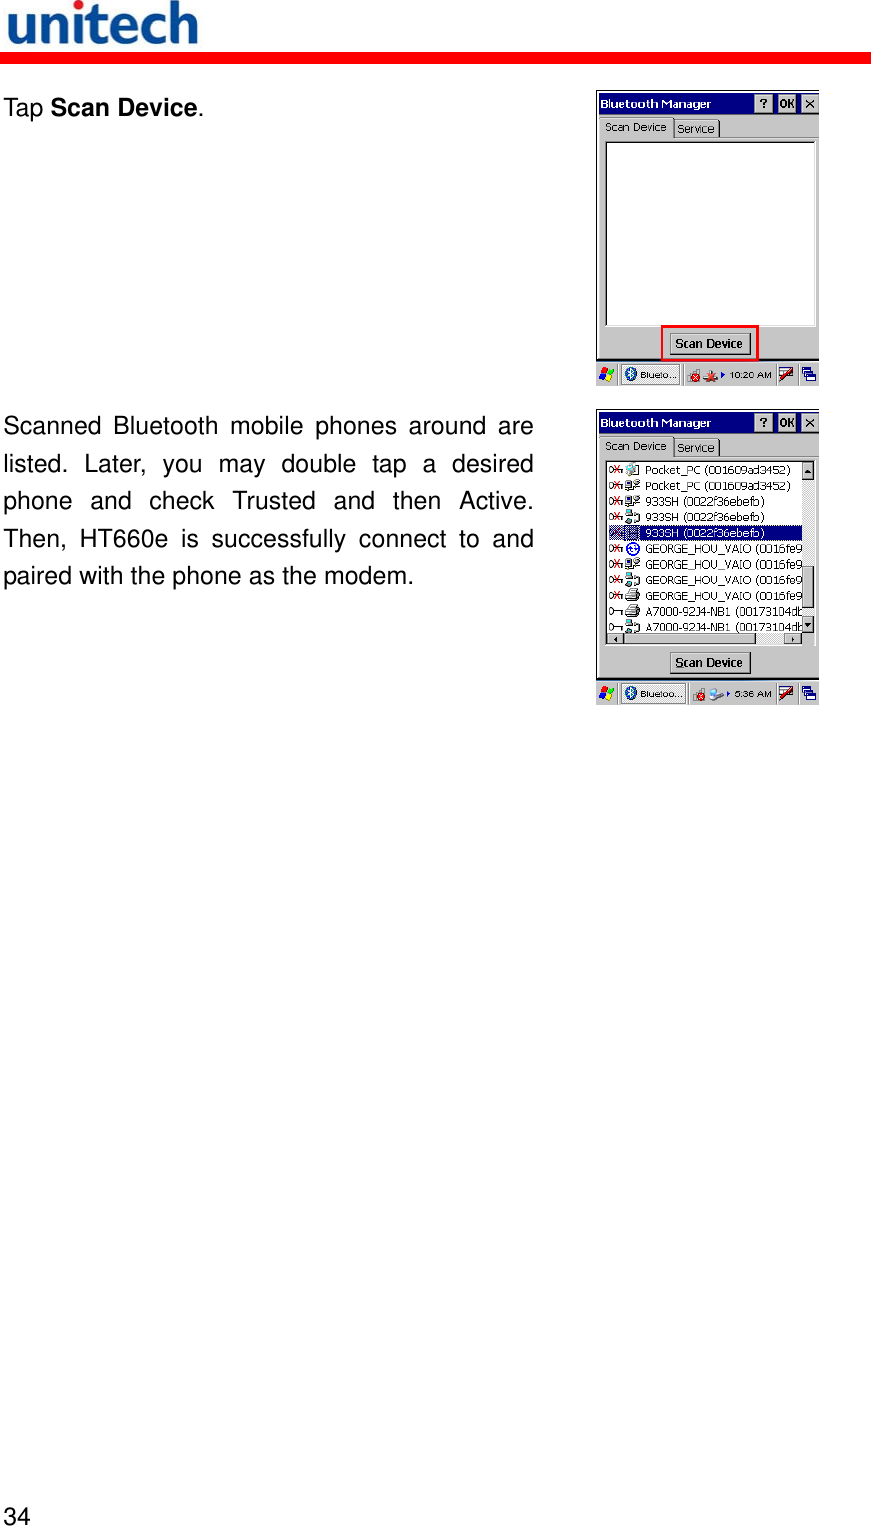   34  Tap Scan Device.  Scanned Bluetooth mobile phones around are listed. Later, you may double tap a desired phone and check Trusted and then Active.Then, HT660e is successfully connect to and paired with the phone as the modem.   